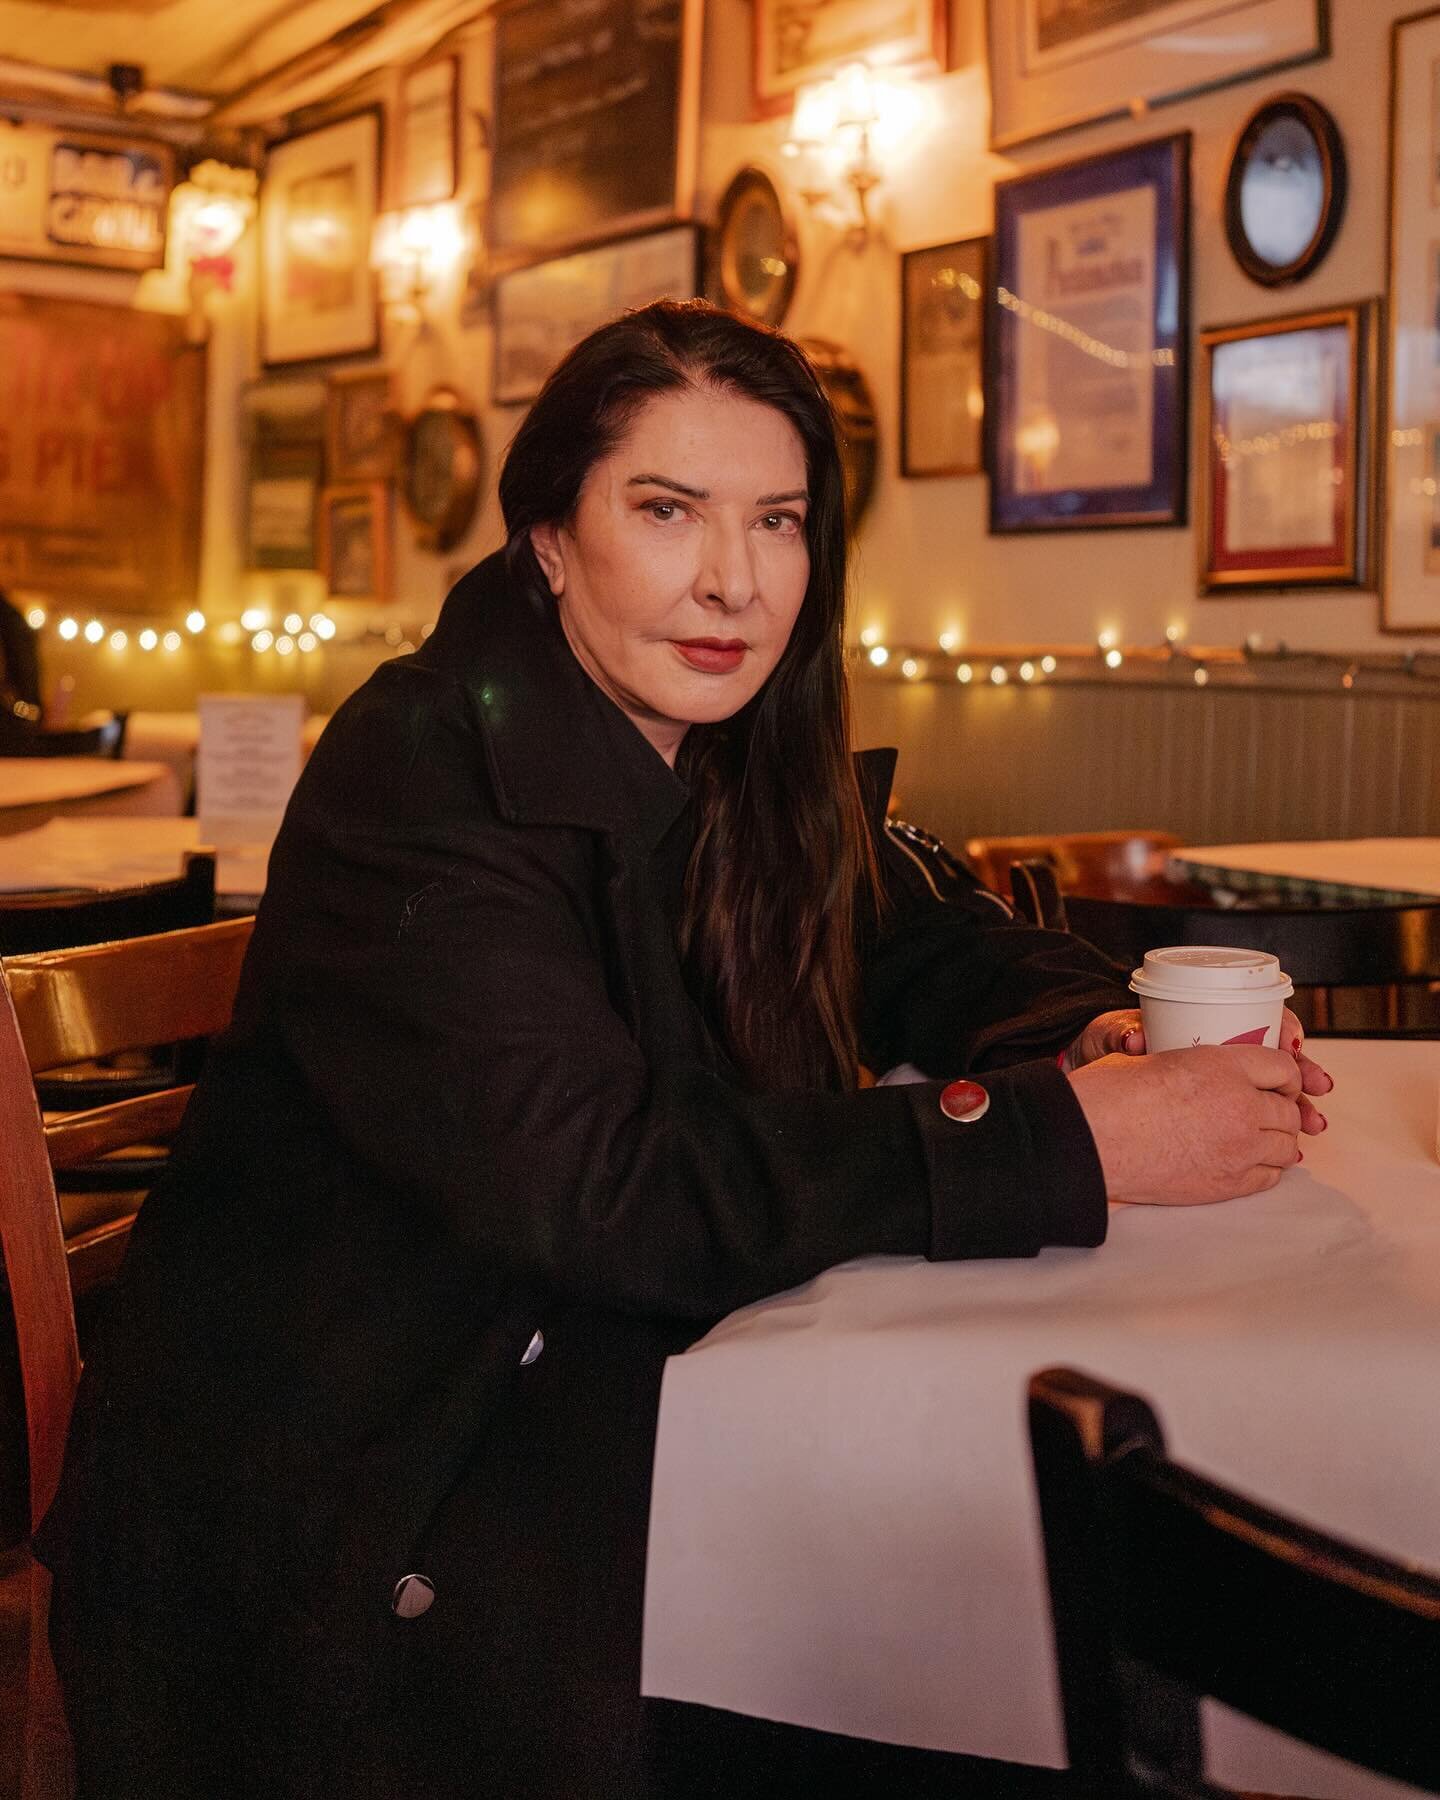 Outtakes from my session with Marina Abramović in her nyc apartment and around historic spots in Tribeca including one the oldest bar &ldquo;The Ear Inn&rdquo; circa 1817 where Jackson Pollock and other artists used to drink.